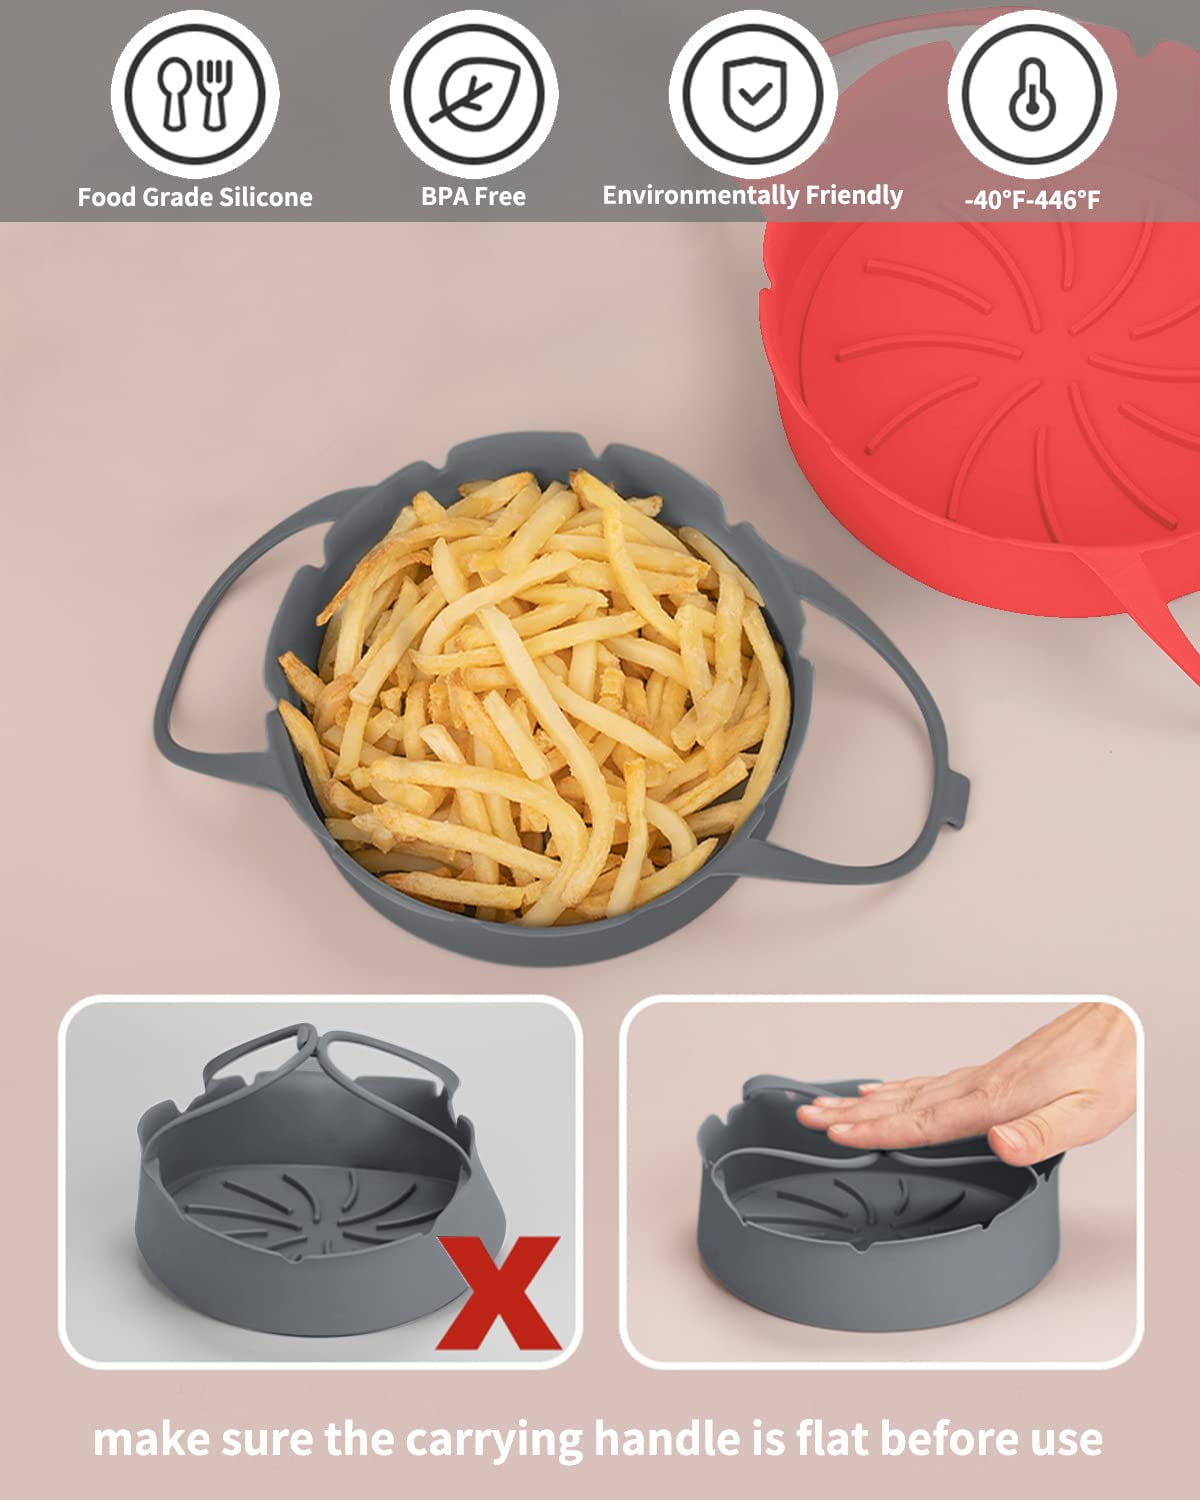 2 Pack Silicone Air Fryer Liners Reusable, Seropy 8.6 Inch Airfryer Liners  4-7 QT Square Air Fryer Liners Silicone Pot Oven Liner Baking Tray, Air